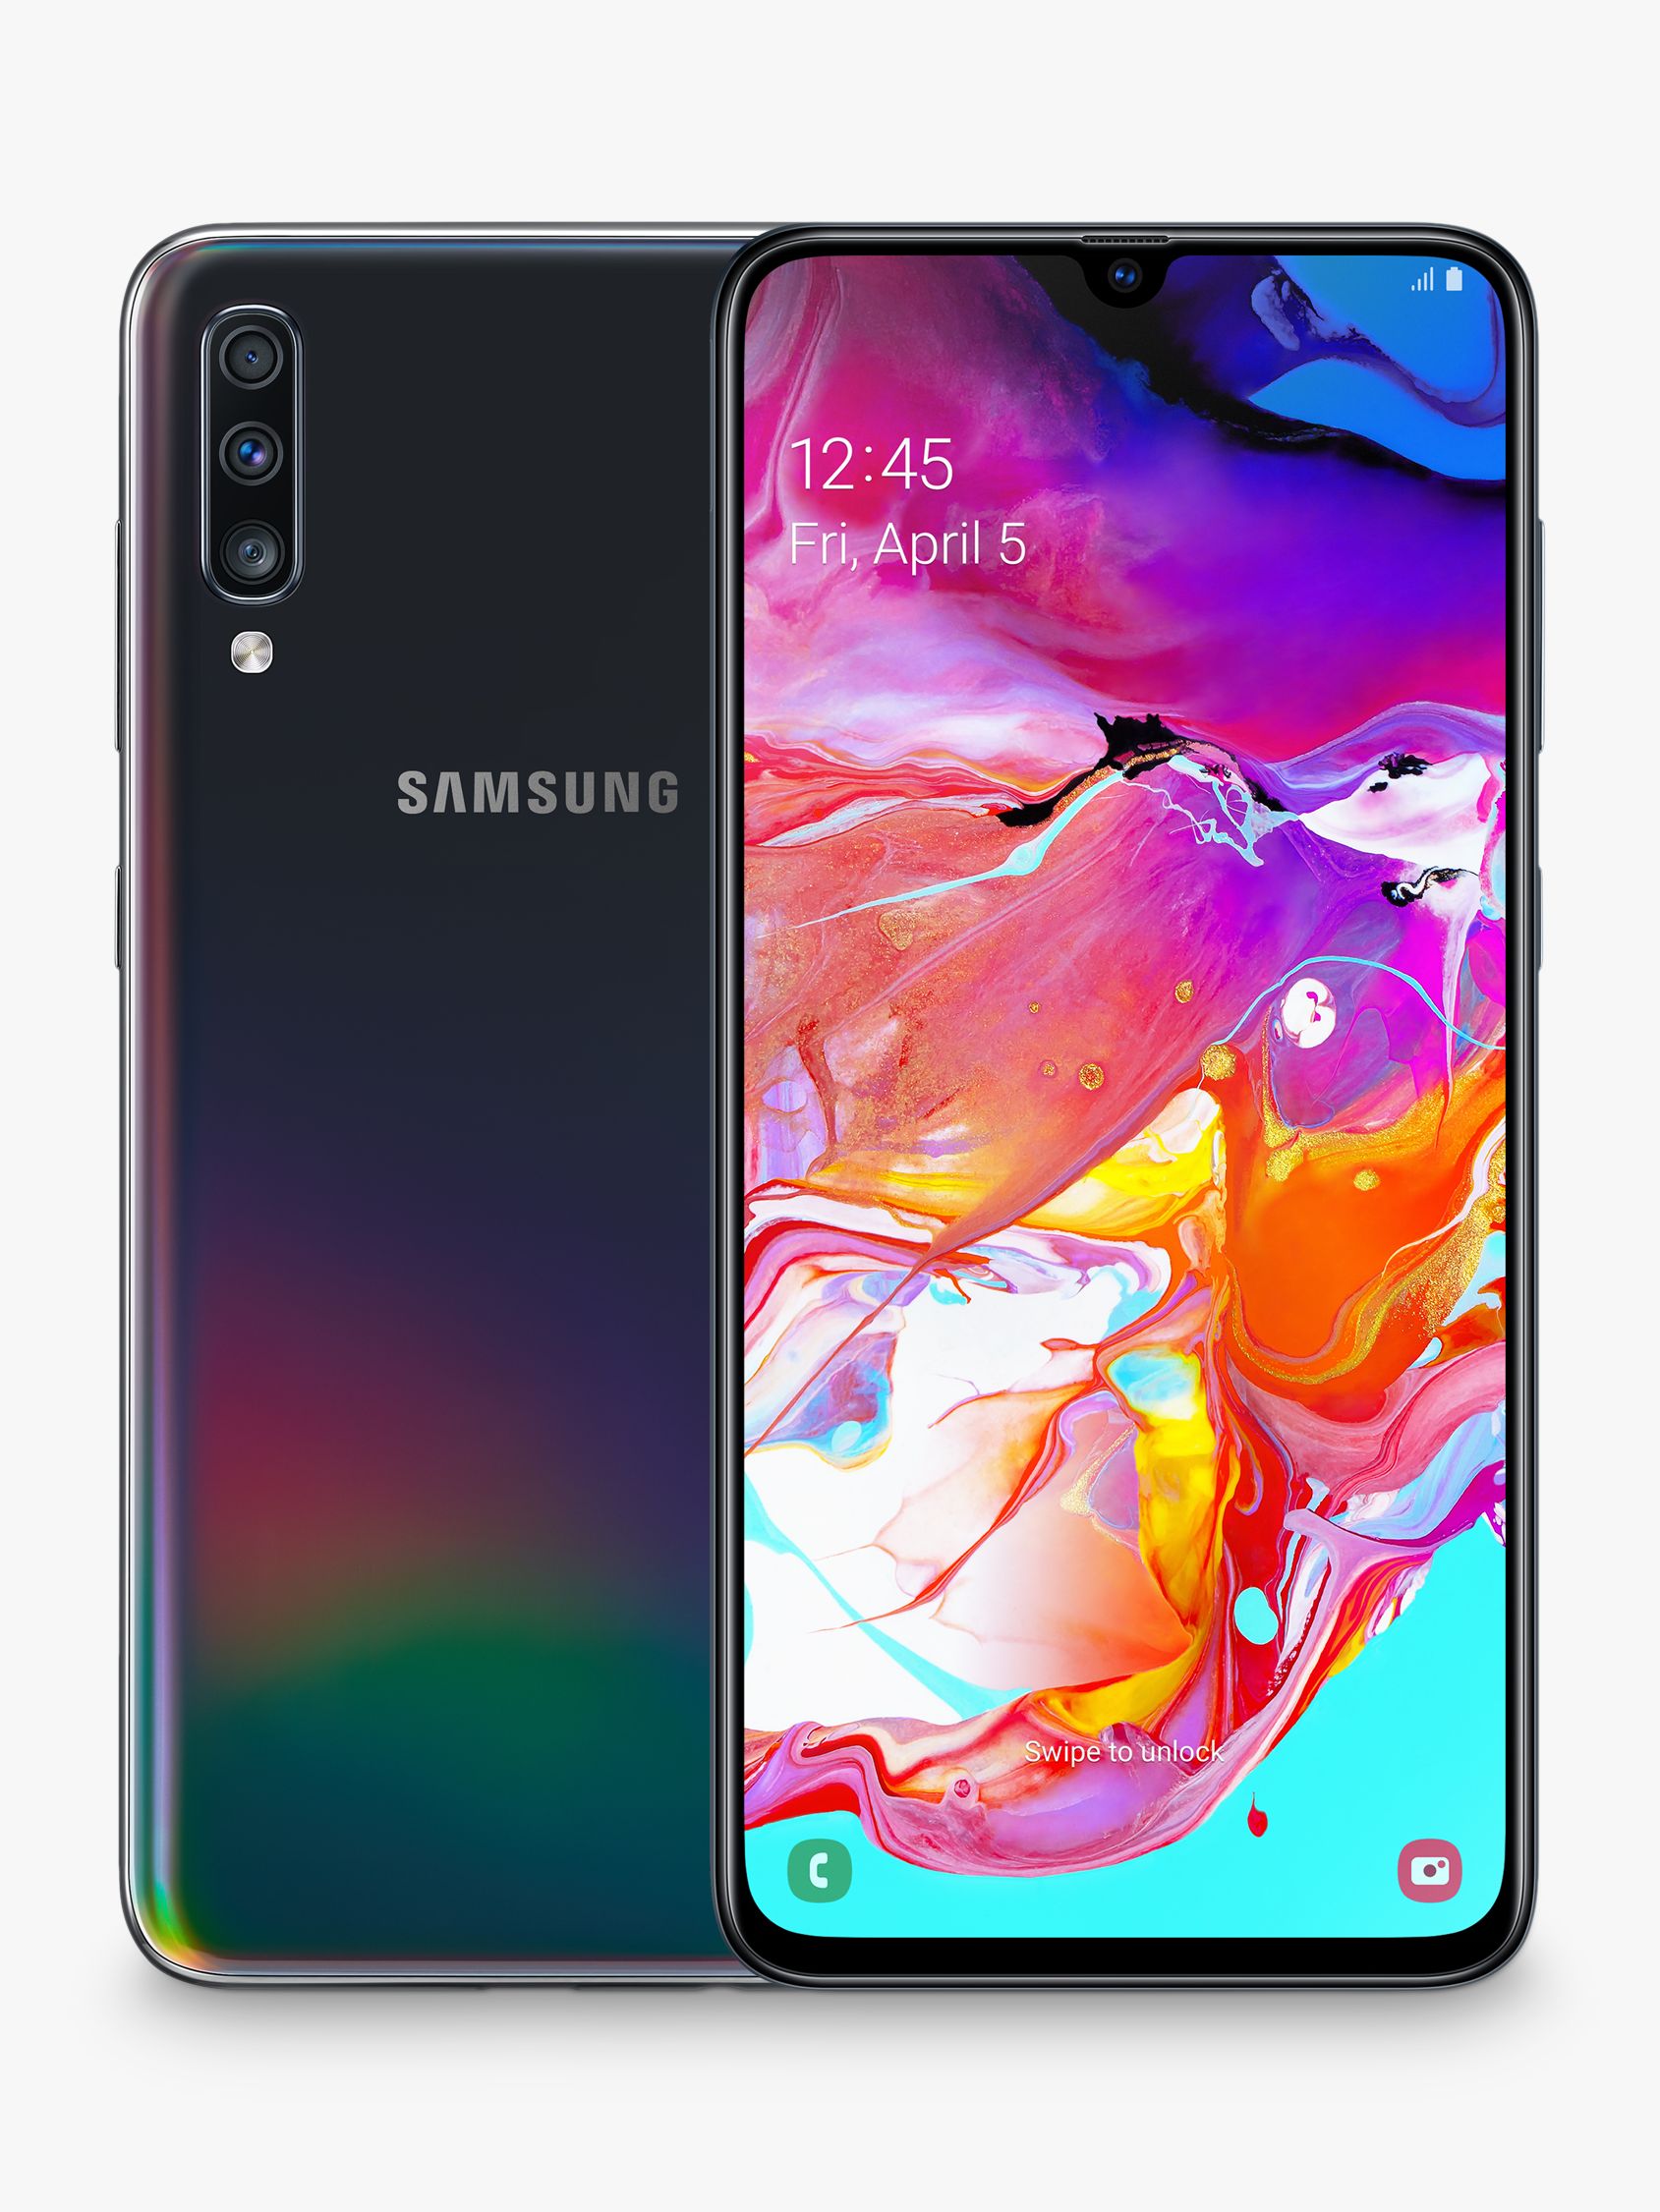 Samsung Galaxy A70 Smartphone, Android 